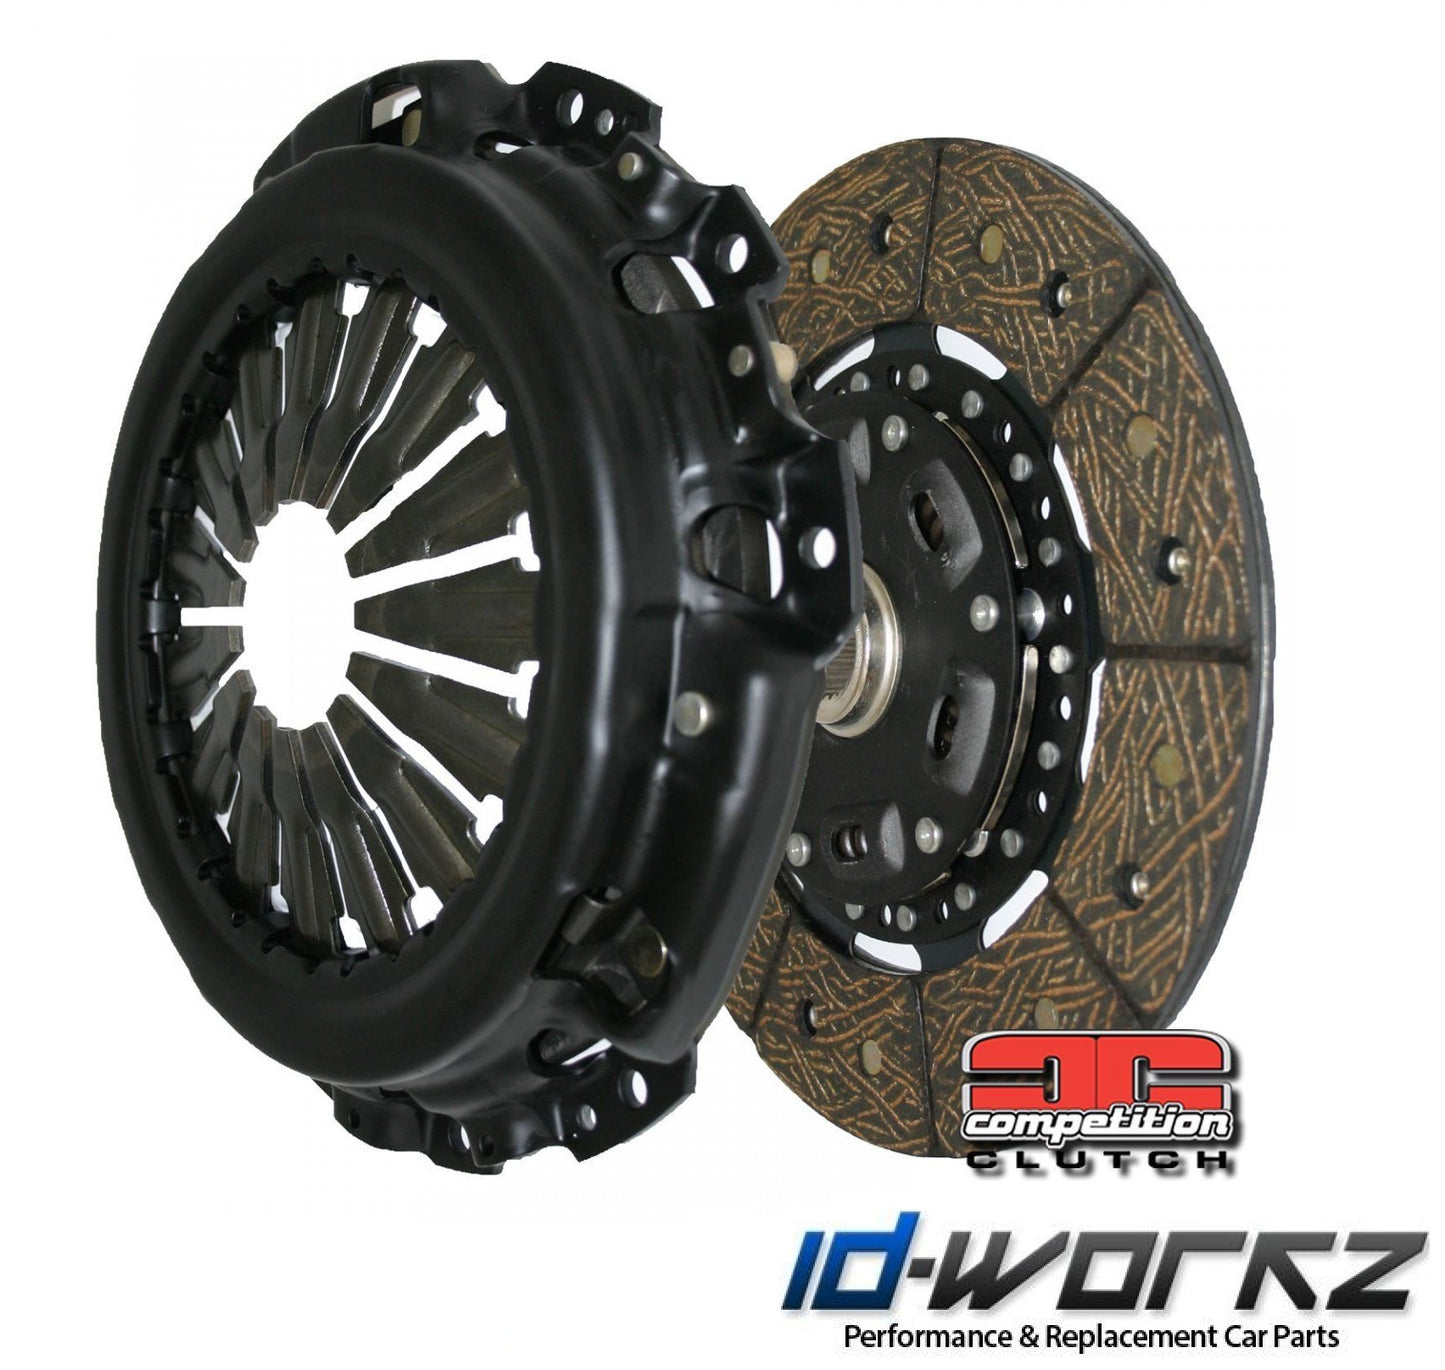 Competition Clutch Kit Stage 2 - Toyota Supra 1JZGTE, 7MGTE, 2JZGE (W58 Gearbox)